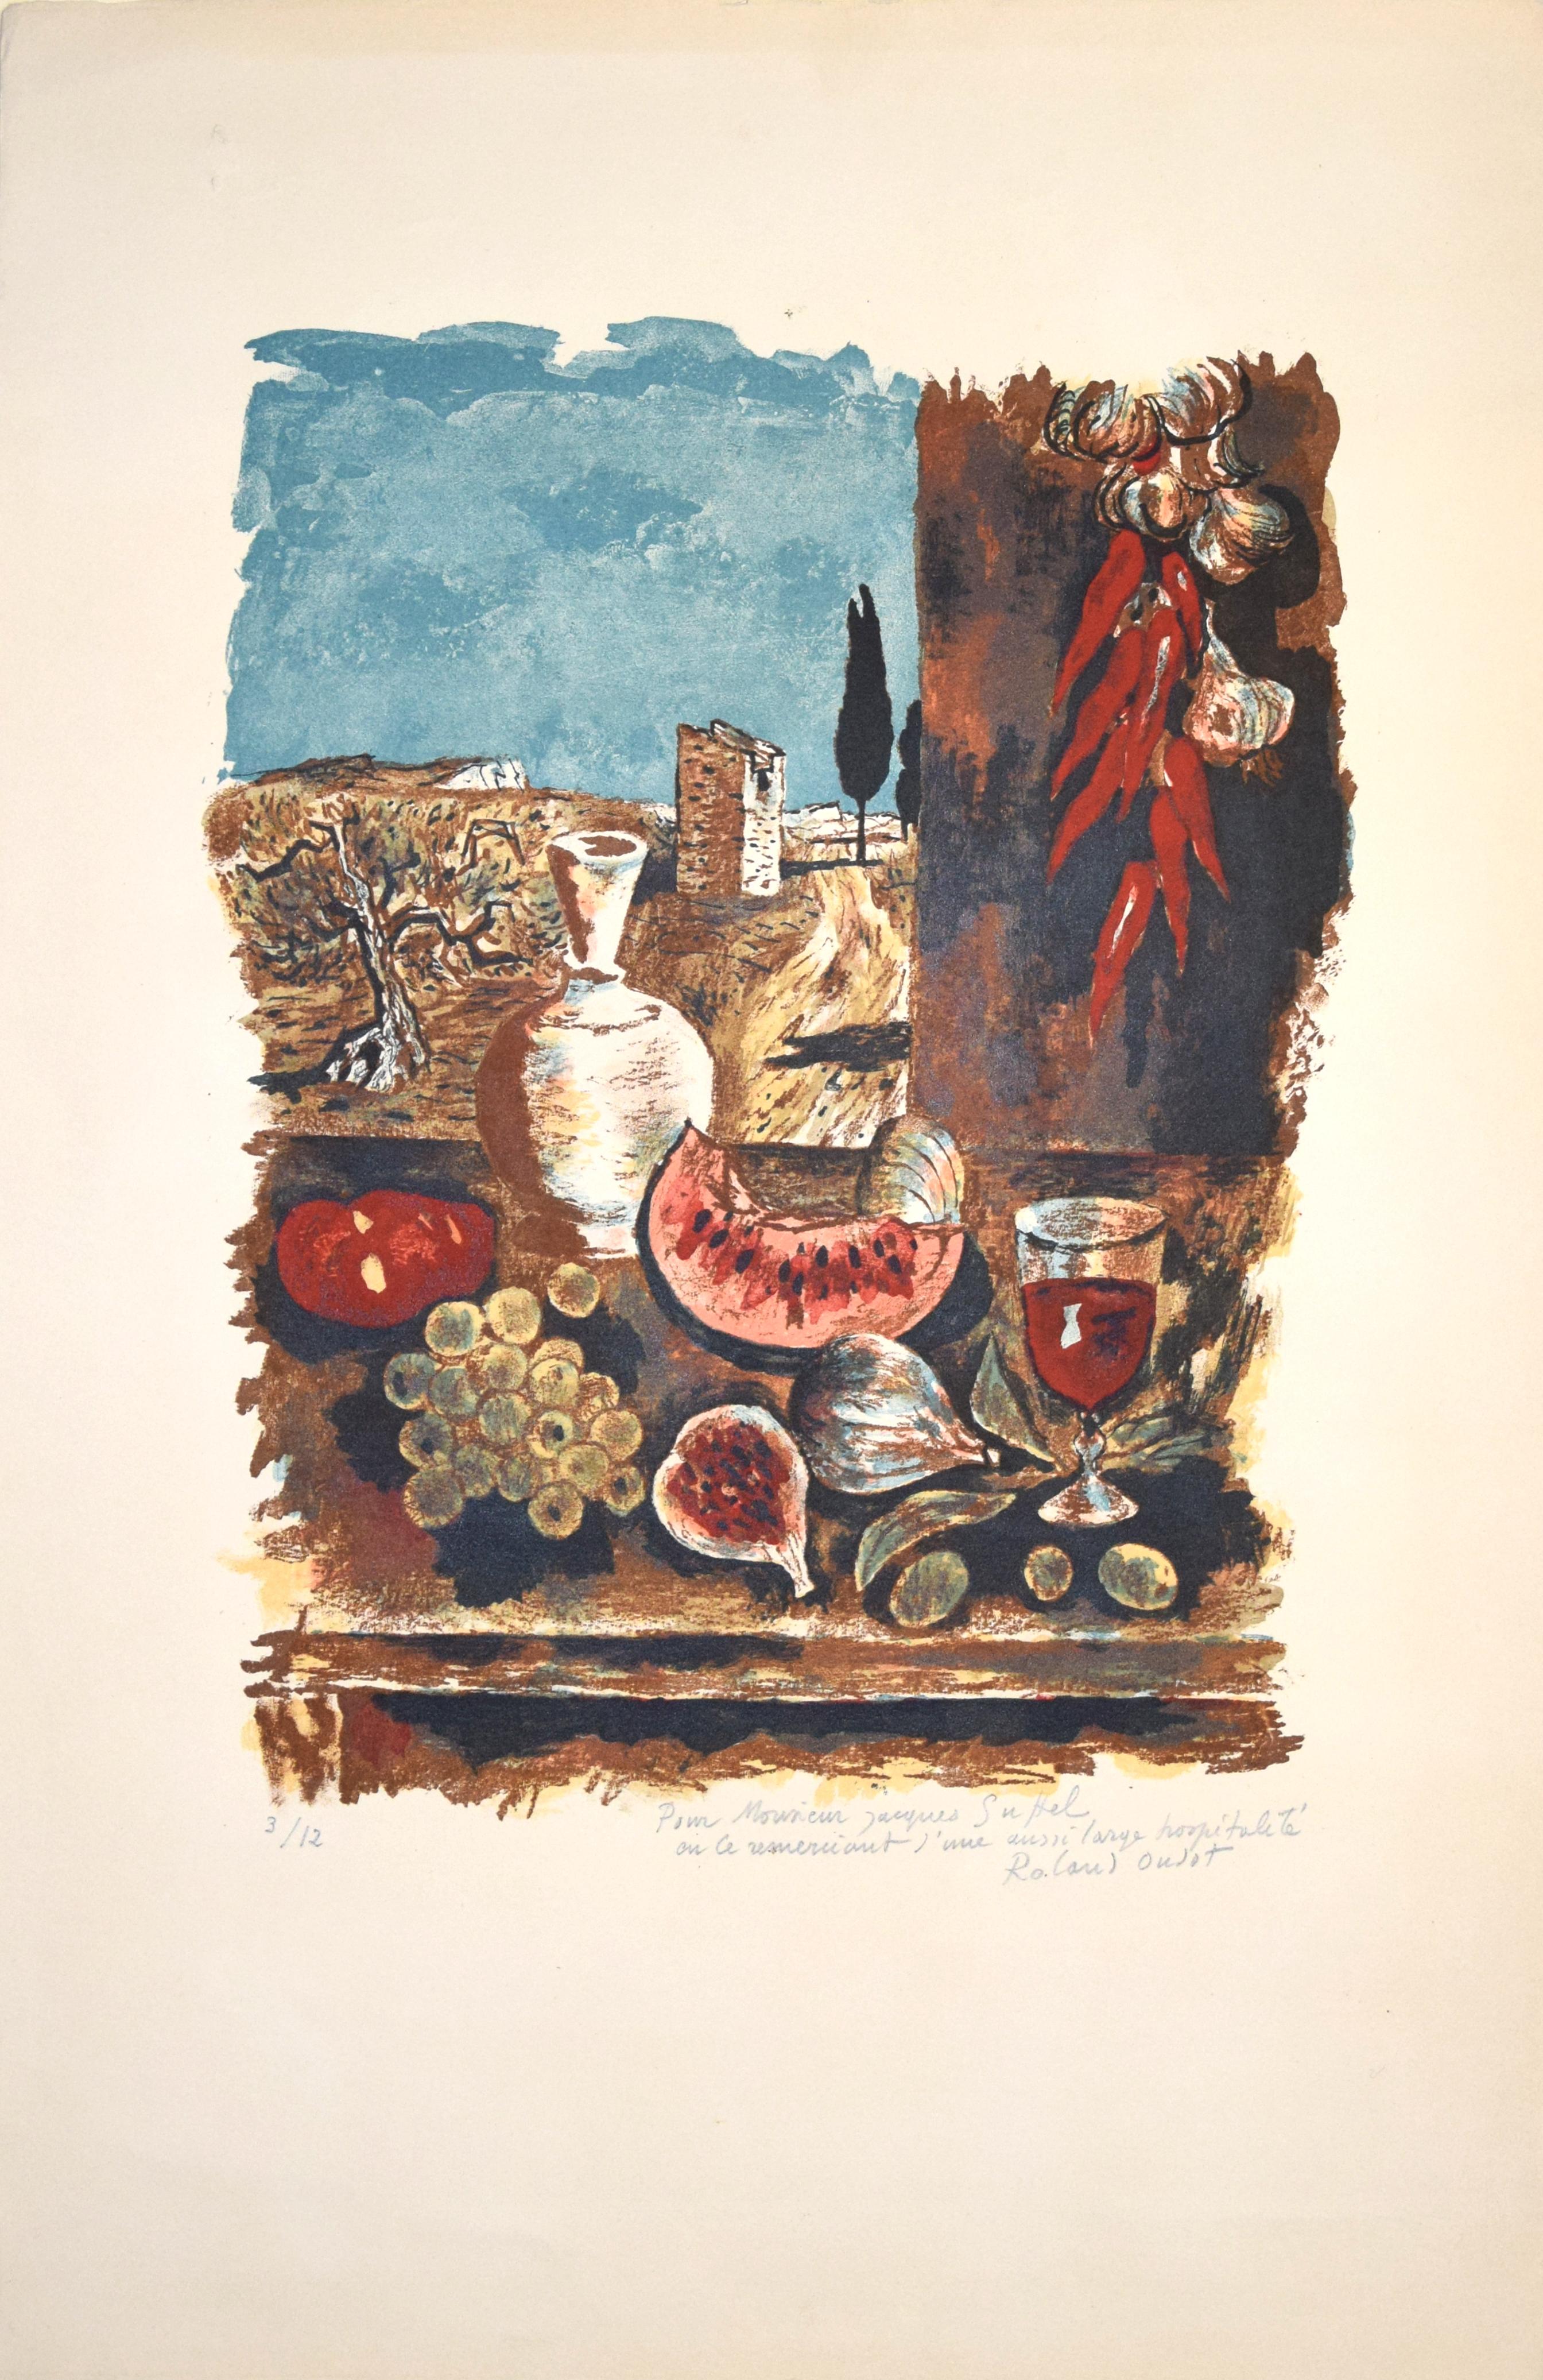 Still Life with Blue Sky - Original Lithograph by Roland Oudot 1